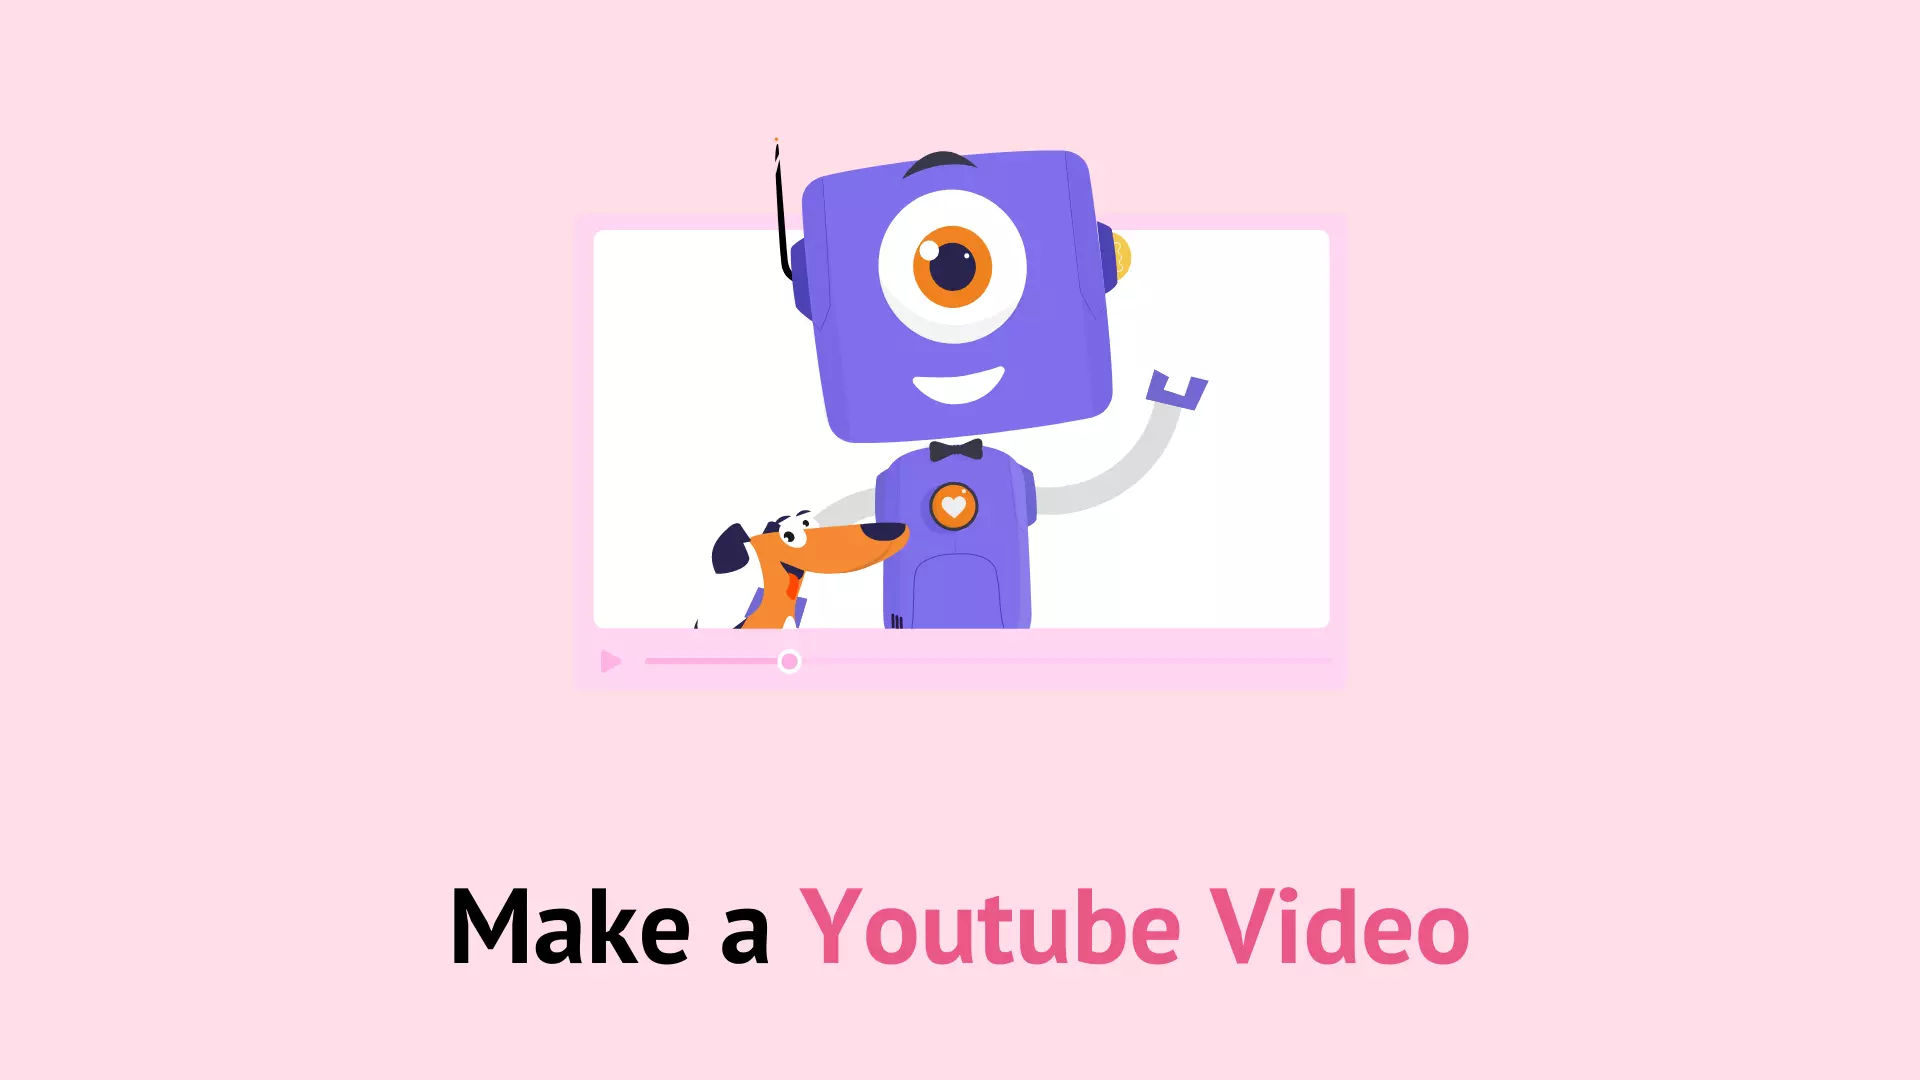 Intro Video maker Logo intro for Android - Free App Download